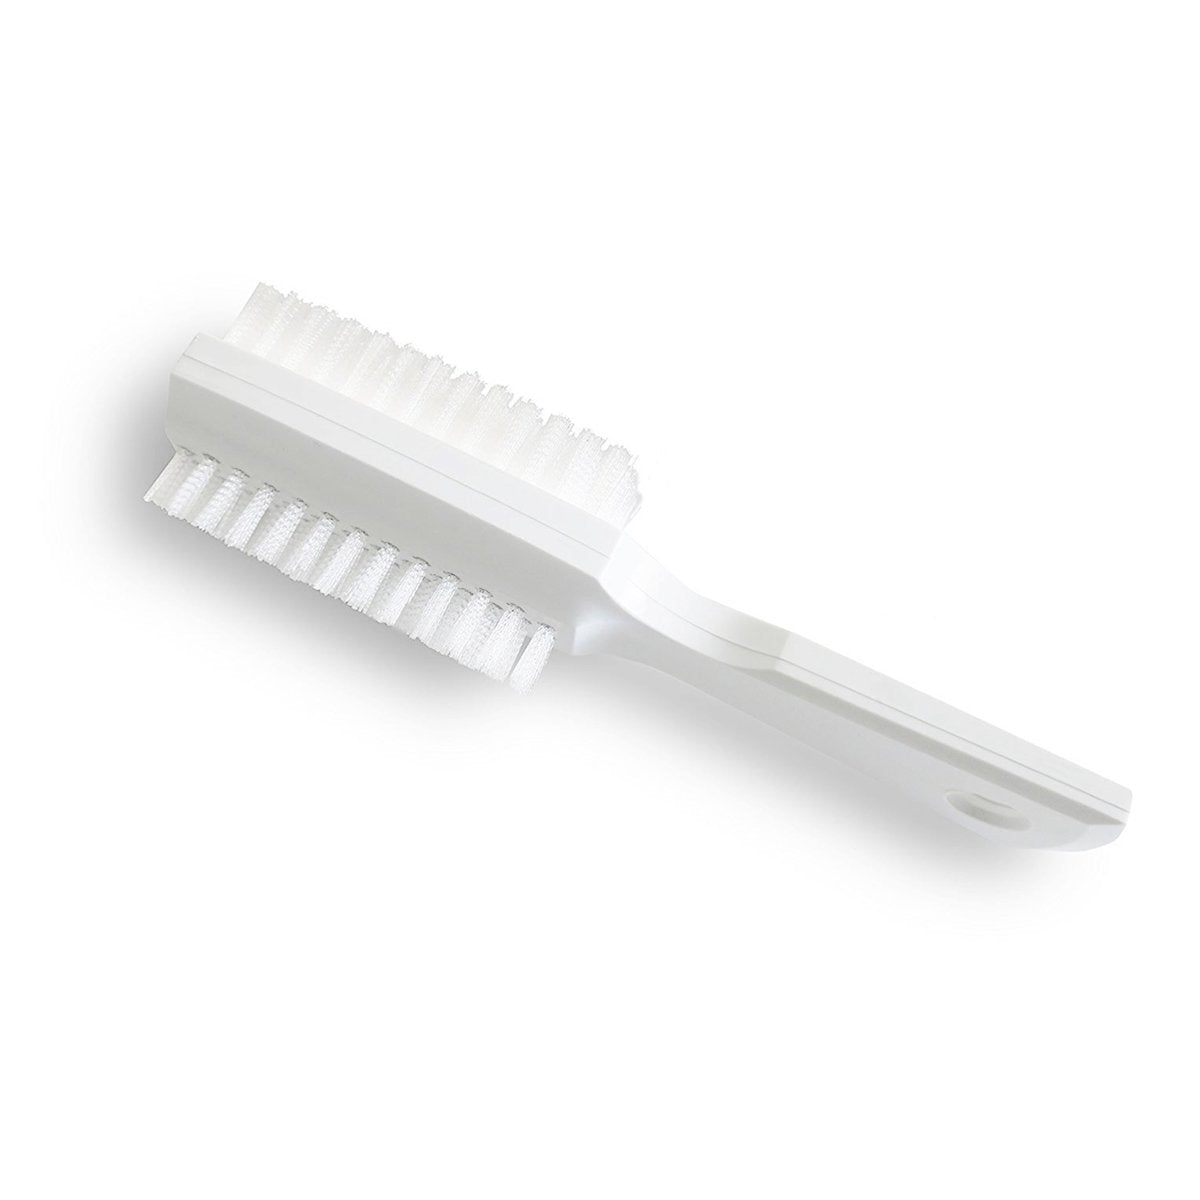 https://cdn.shopify.com/s/files/1/0430/0704/9886/products/hand-nail-brush-double-sides-of-bristles-use-wet-or-dry-easy-hold-handle-other-brushes.jpg?v=1596014714